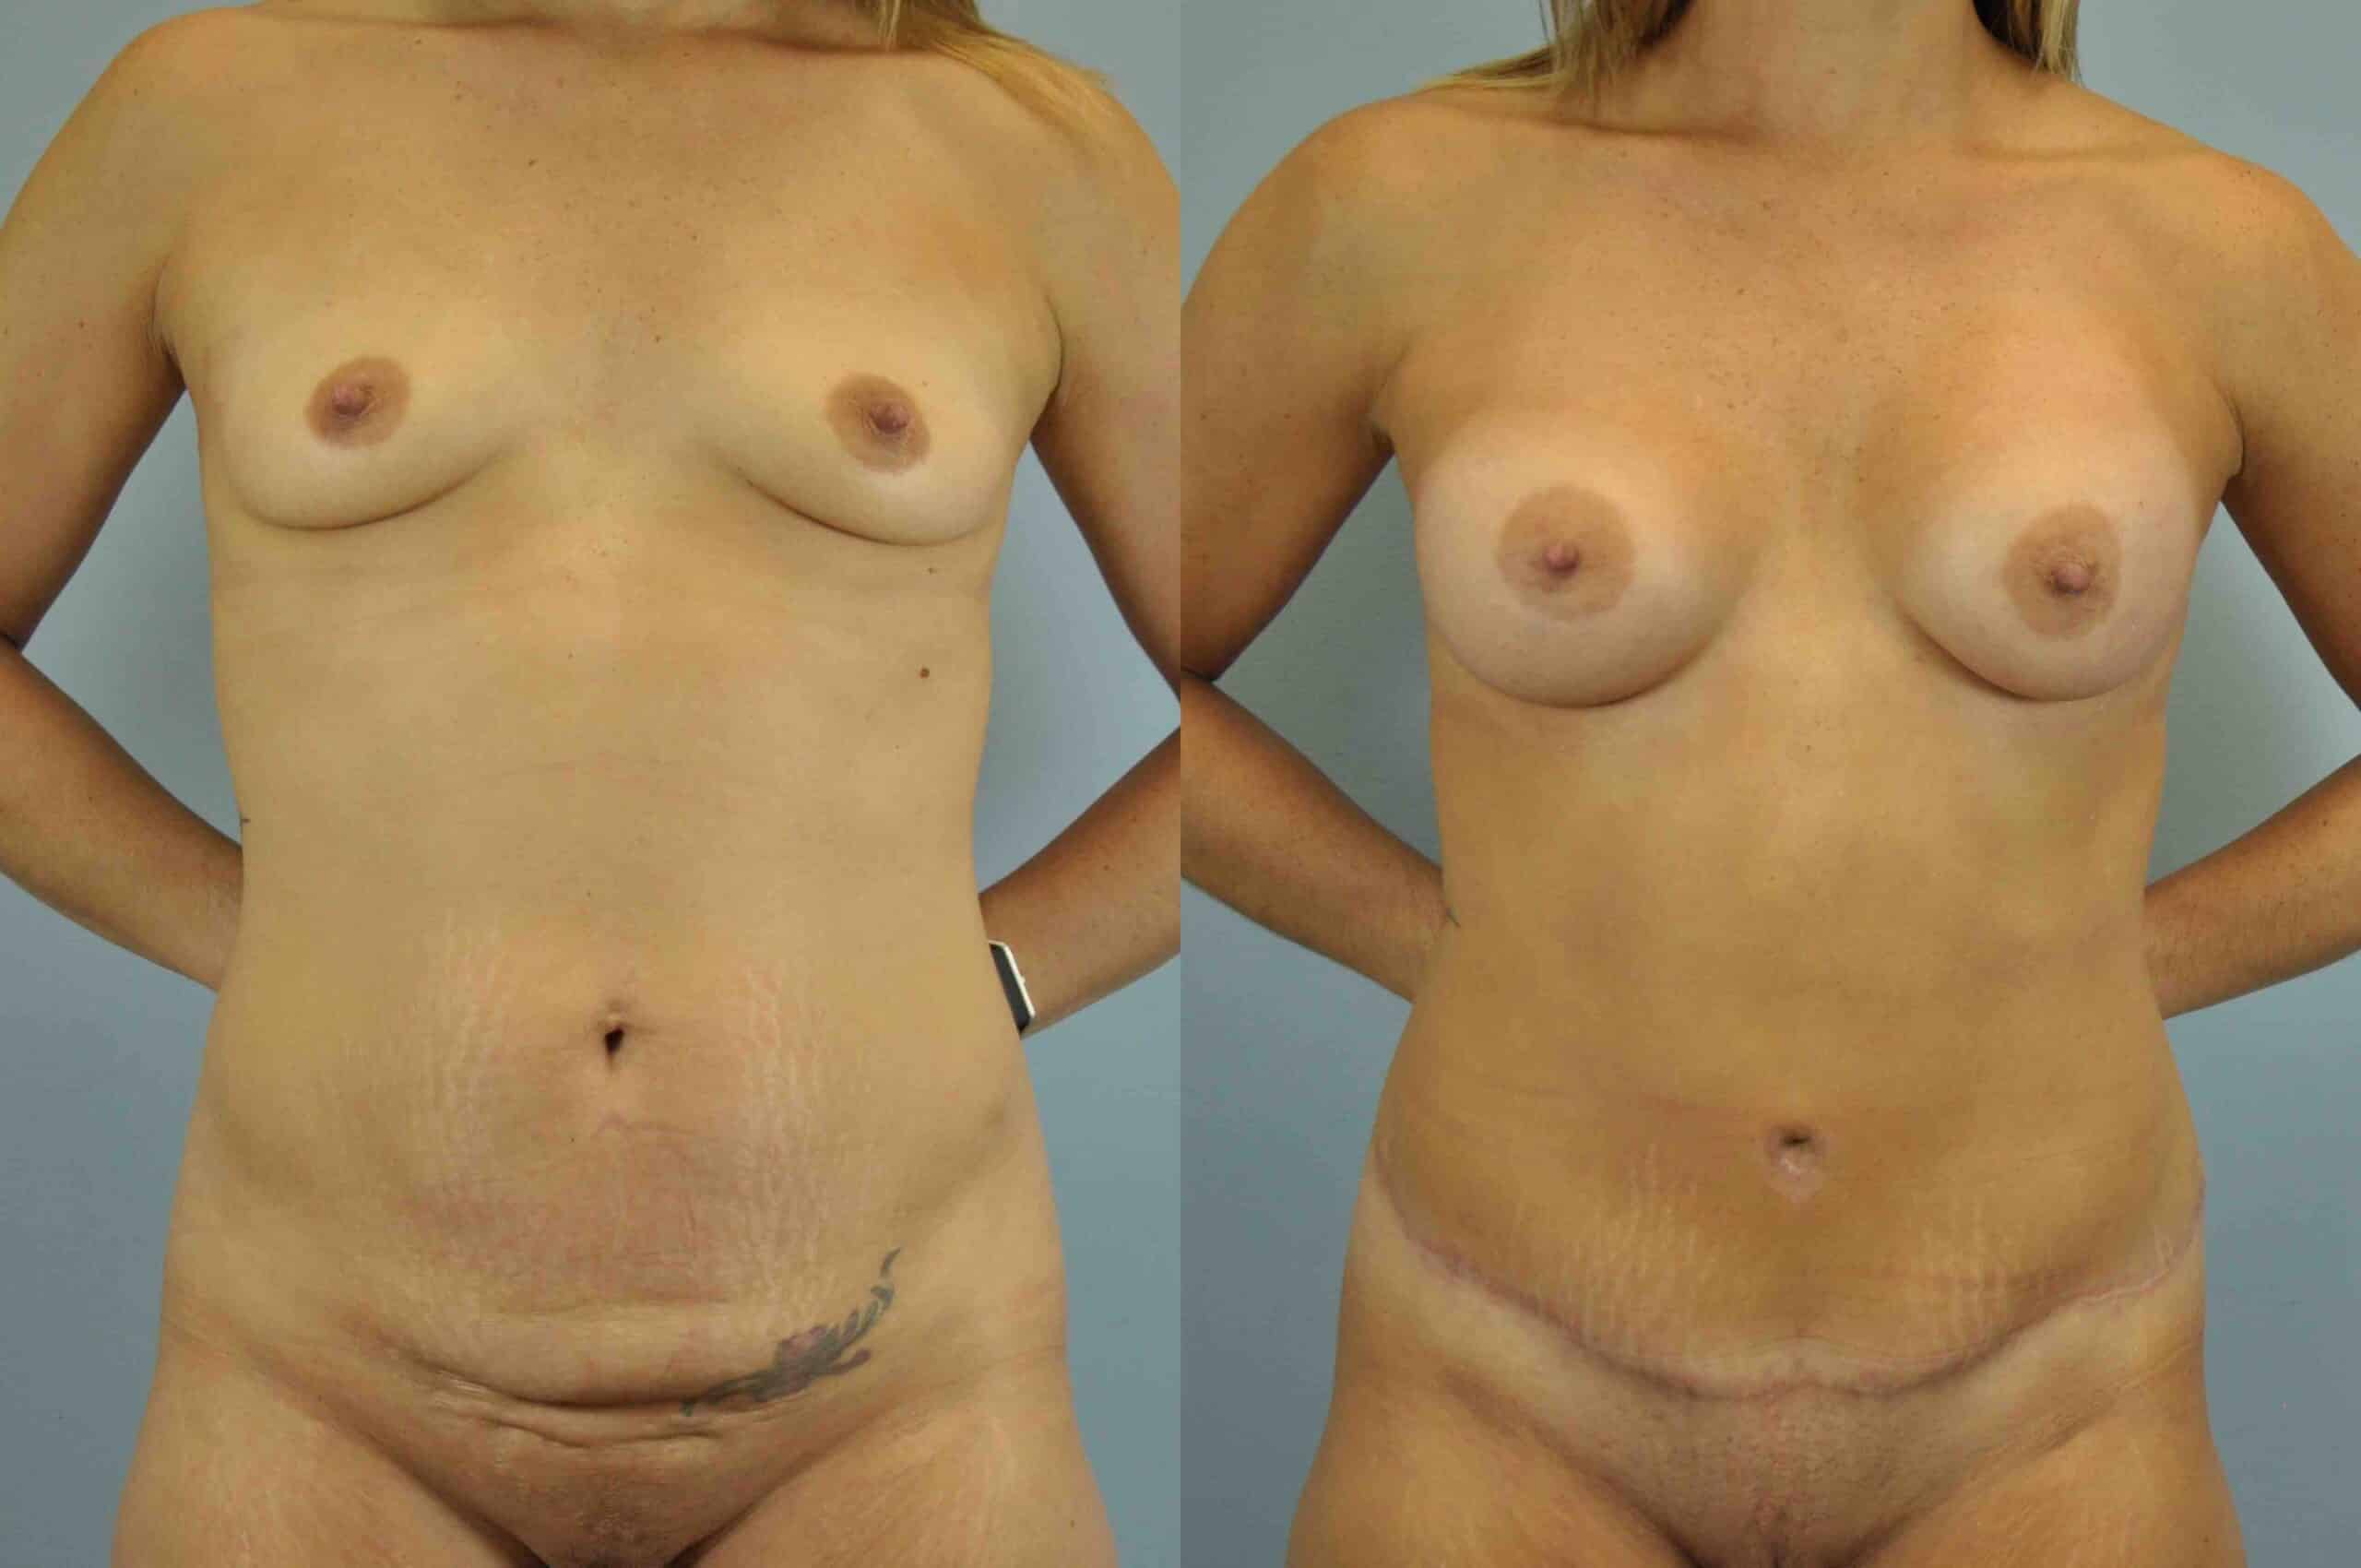 Before and after, patient 2 mo post op from Tummy Tuck and Breast Augmentation procedures performed by Dr. Paul Vanek